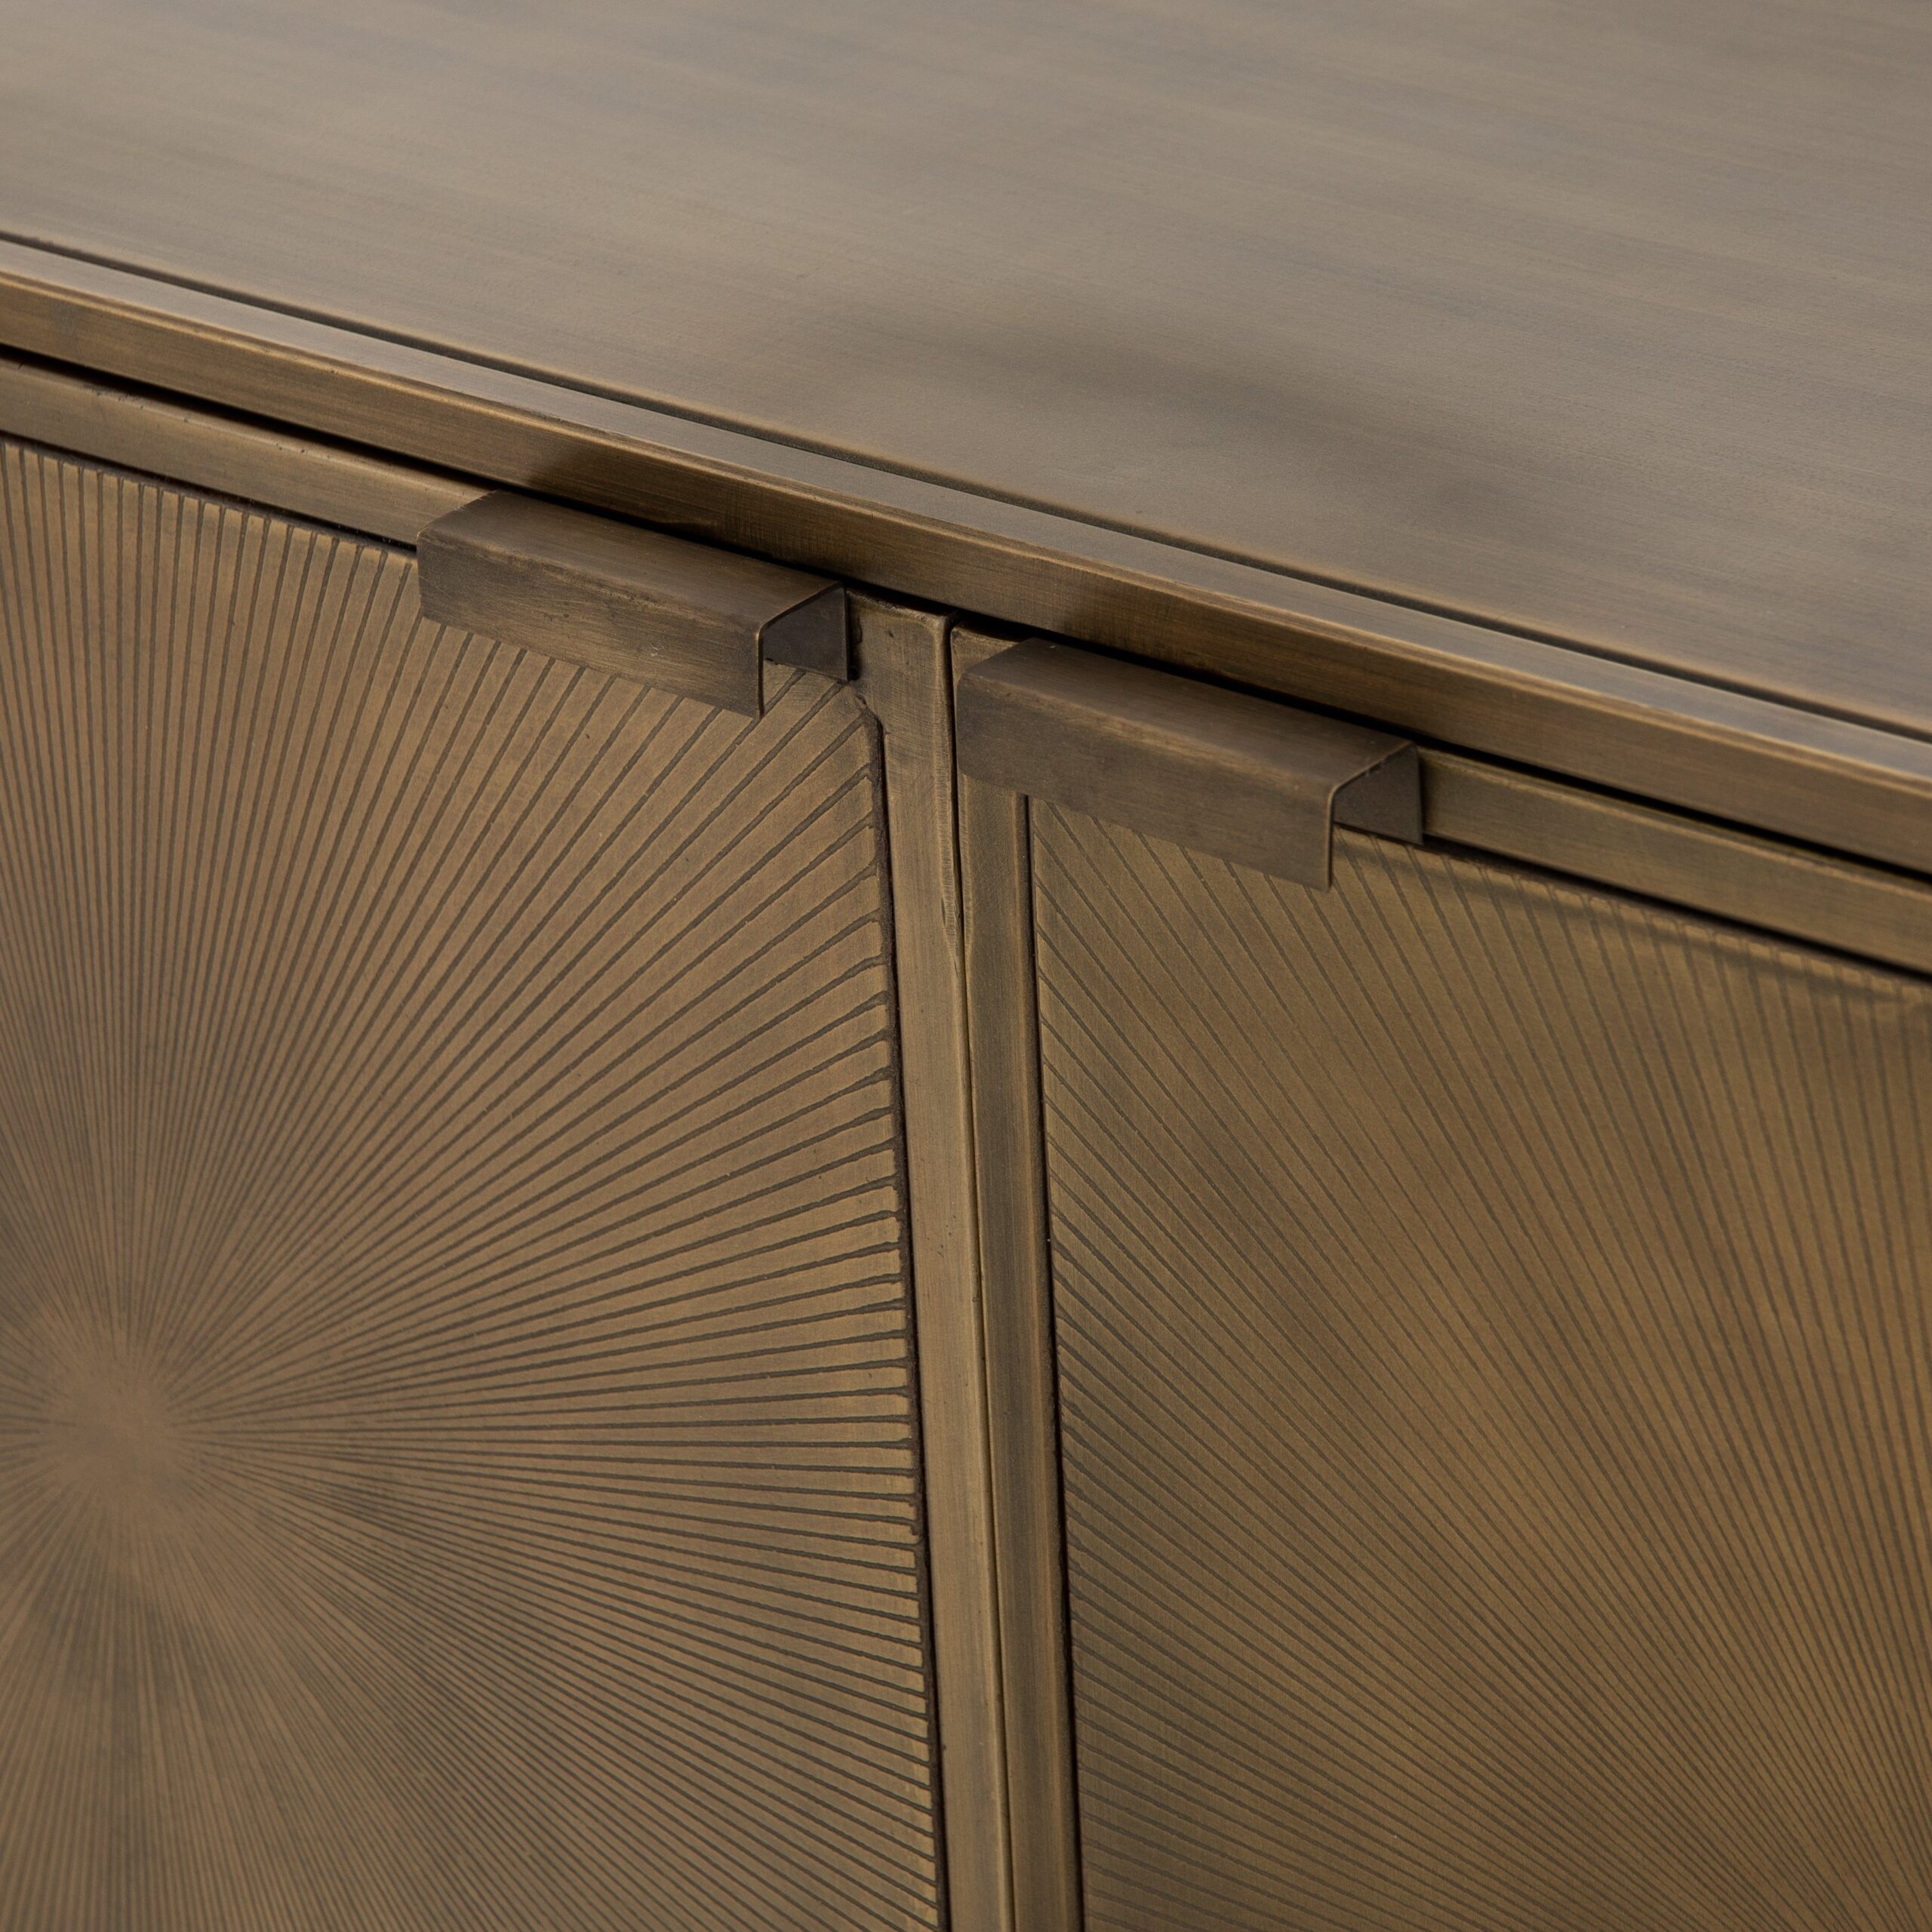 Beautifully Aged Brass Sideboards for
Timeless Elegance